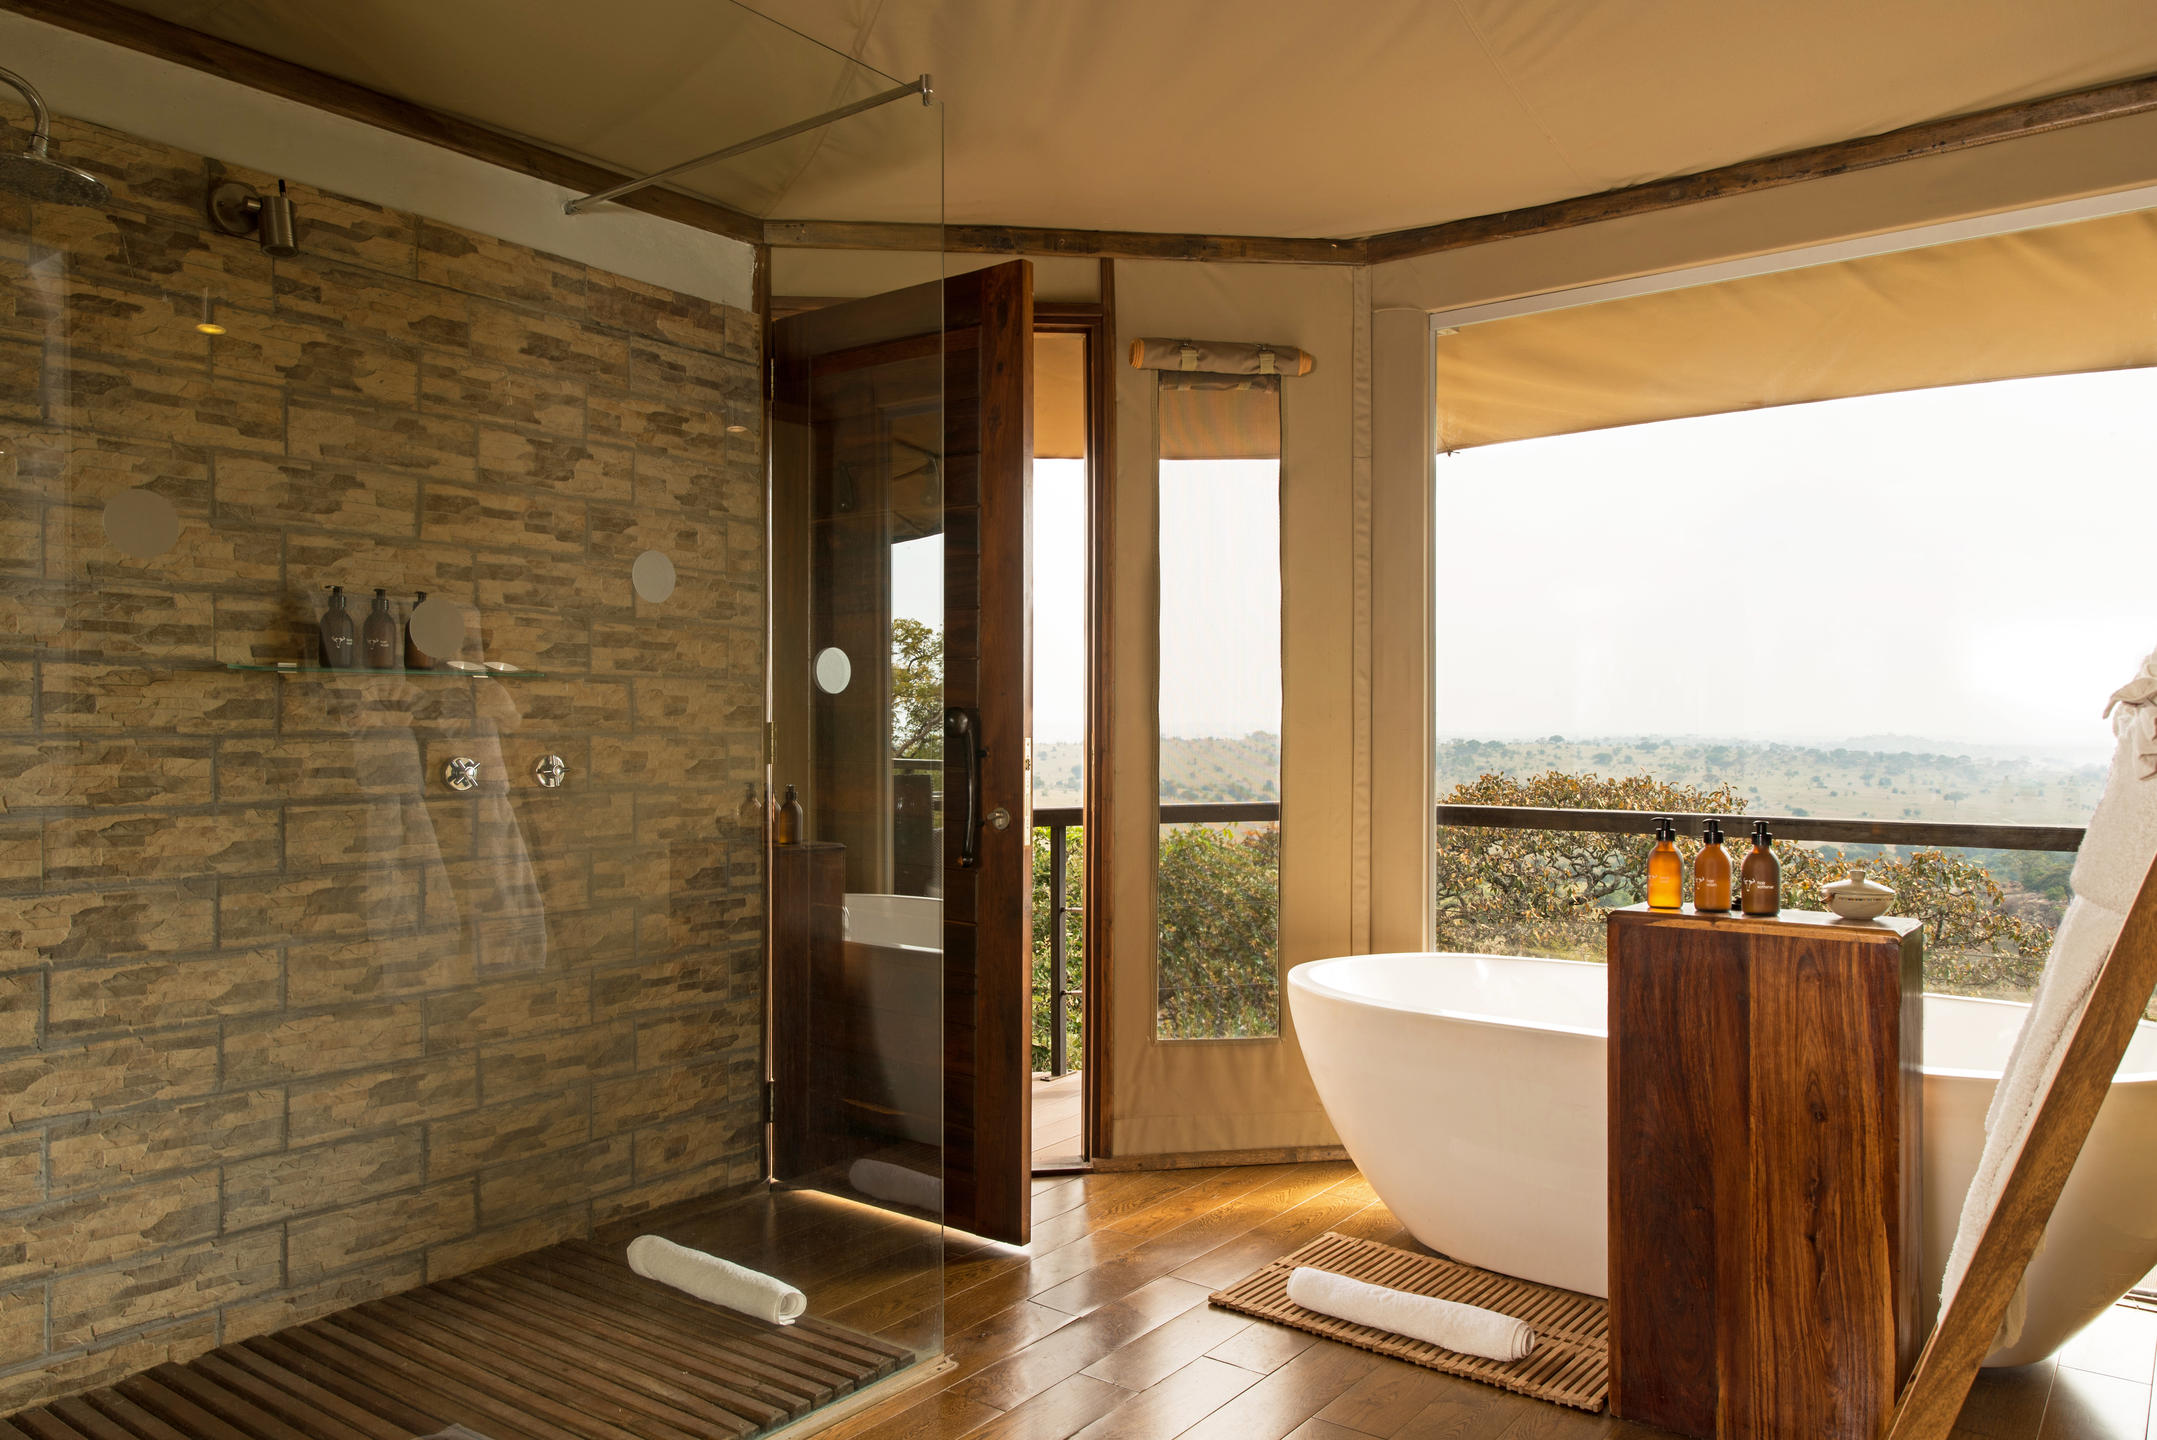 View out of a bathroom suite at the Lemala Kuria Hills Lodge